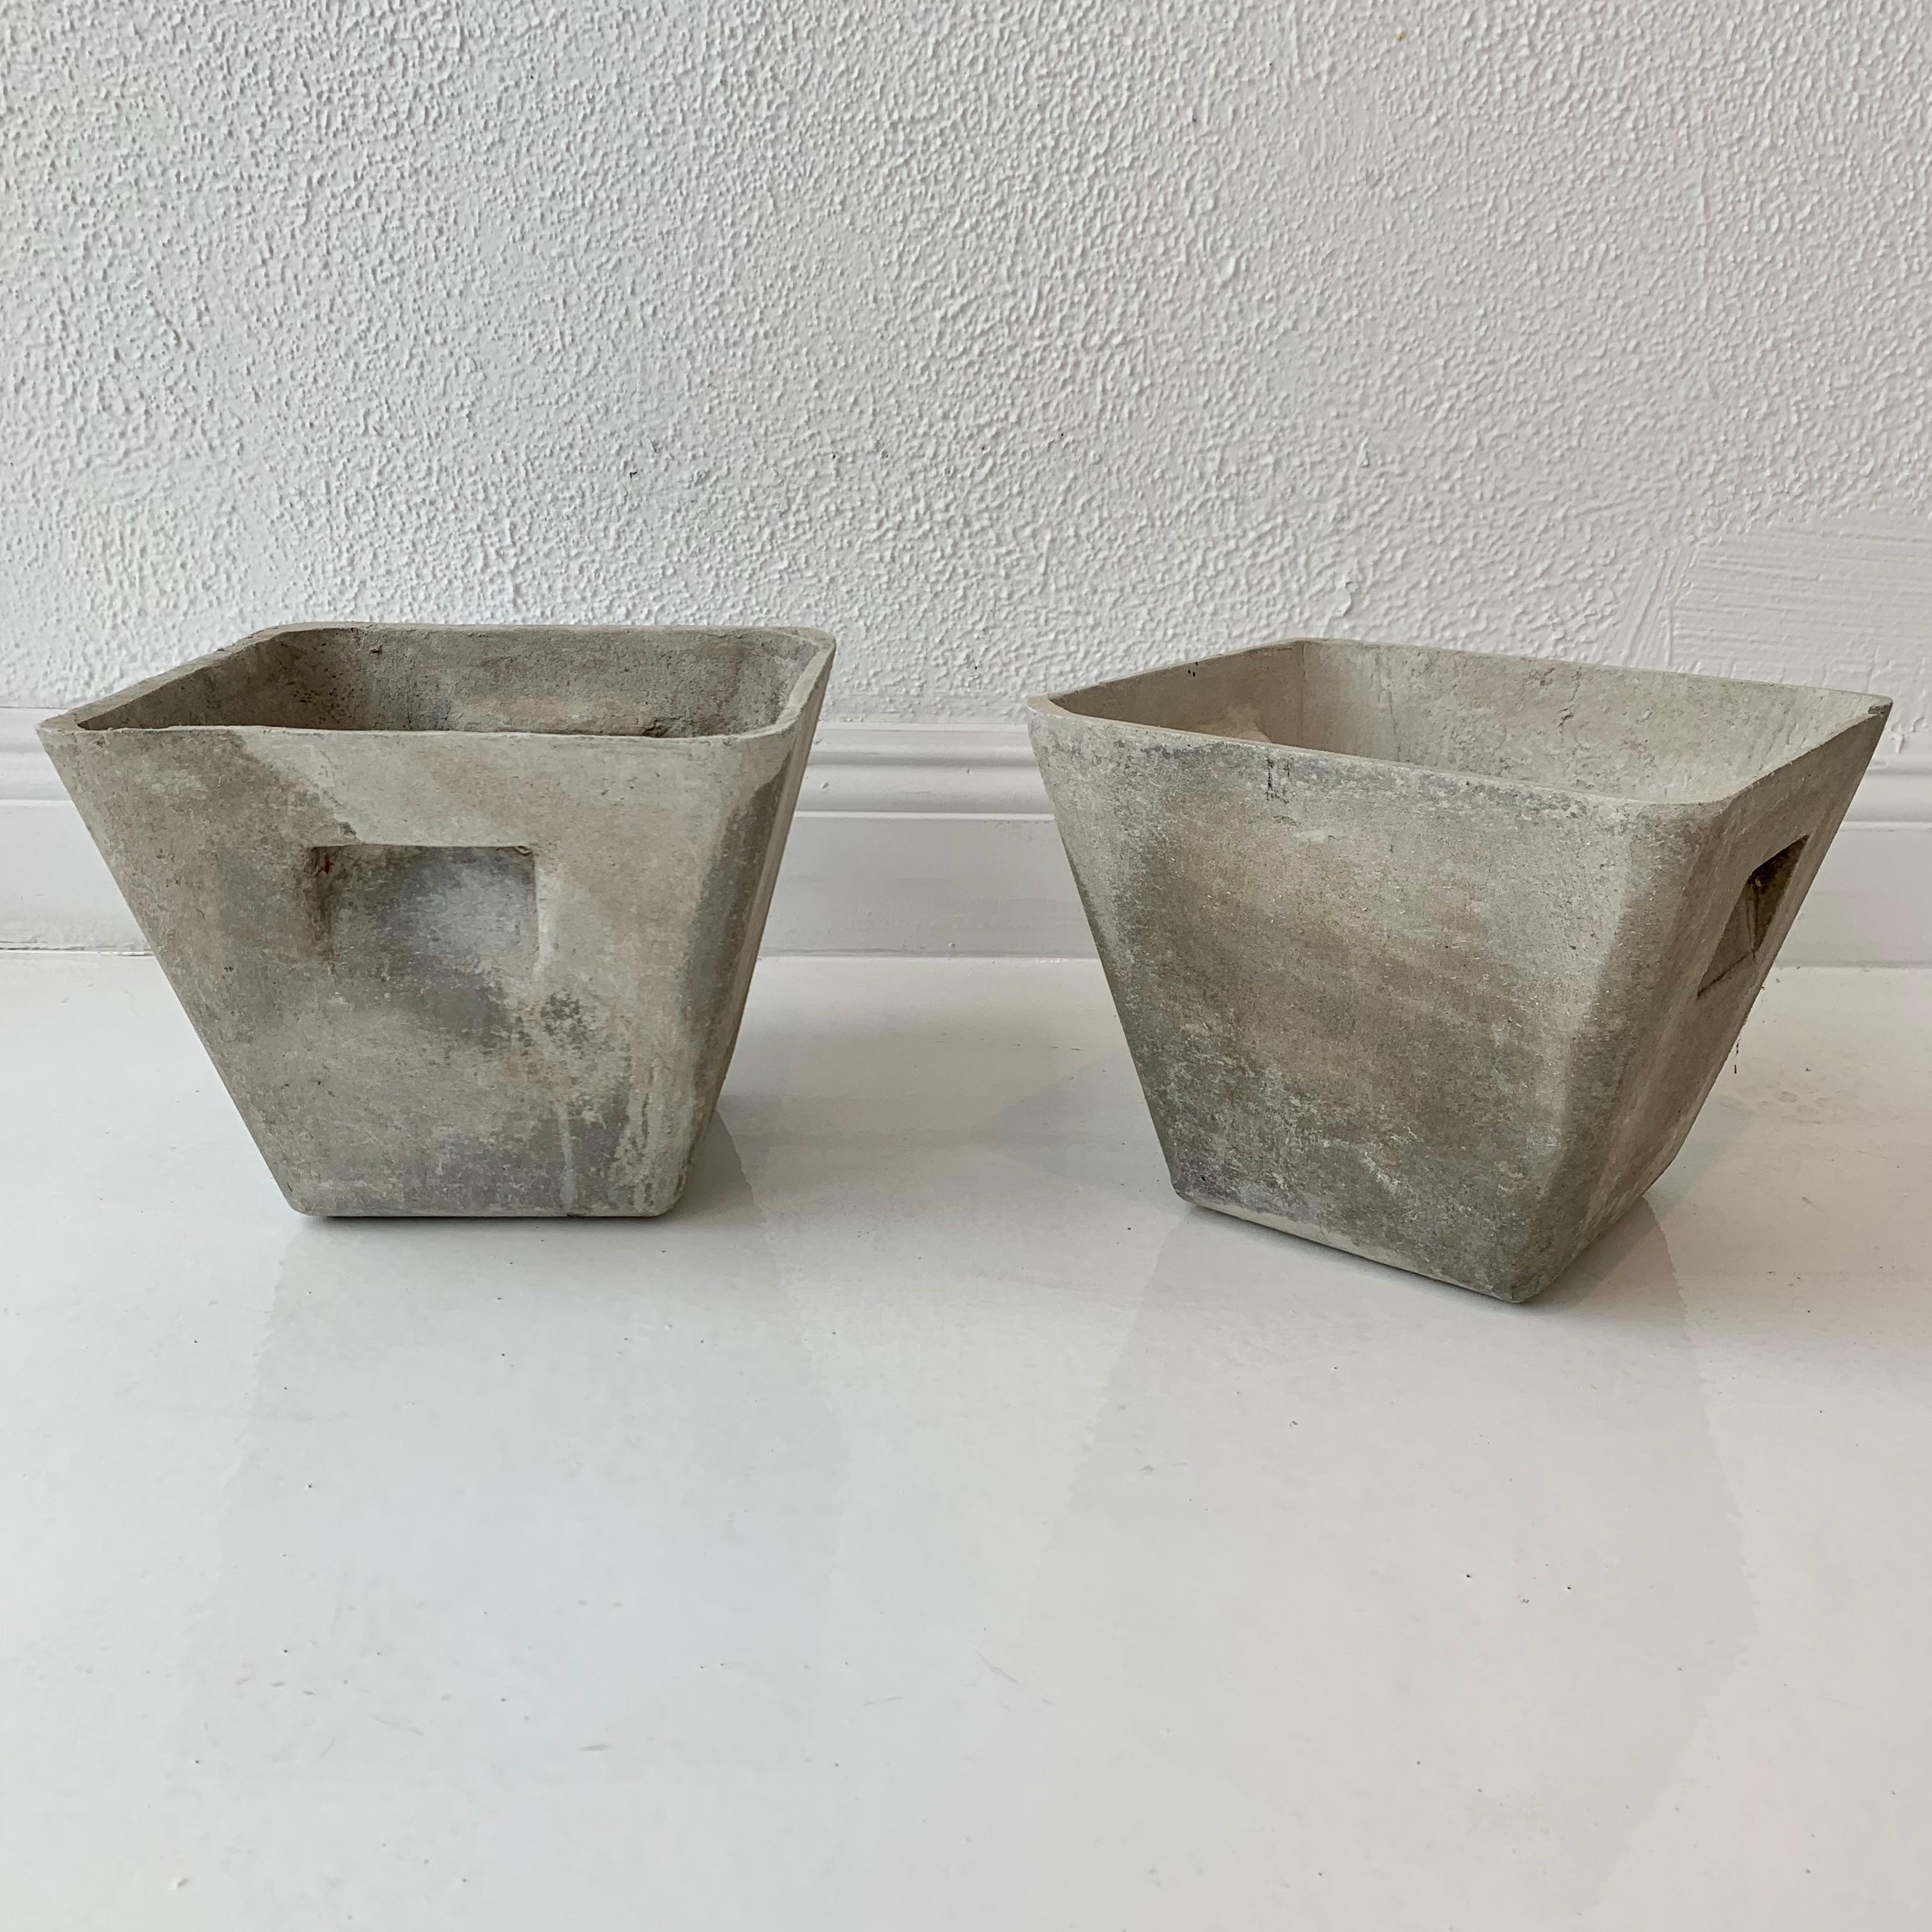 Square concrete planter by Willy Guhl. Made in Switzerland in the 1960s. Great condition. Original coloring and patina. Classic square planter with indented handles on both sides. 4 available. Priced individually. 


   